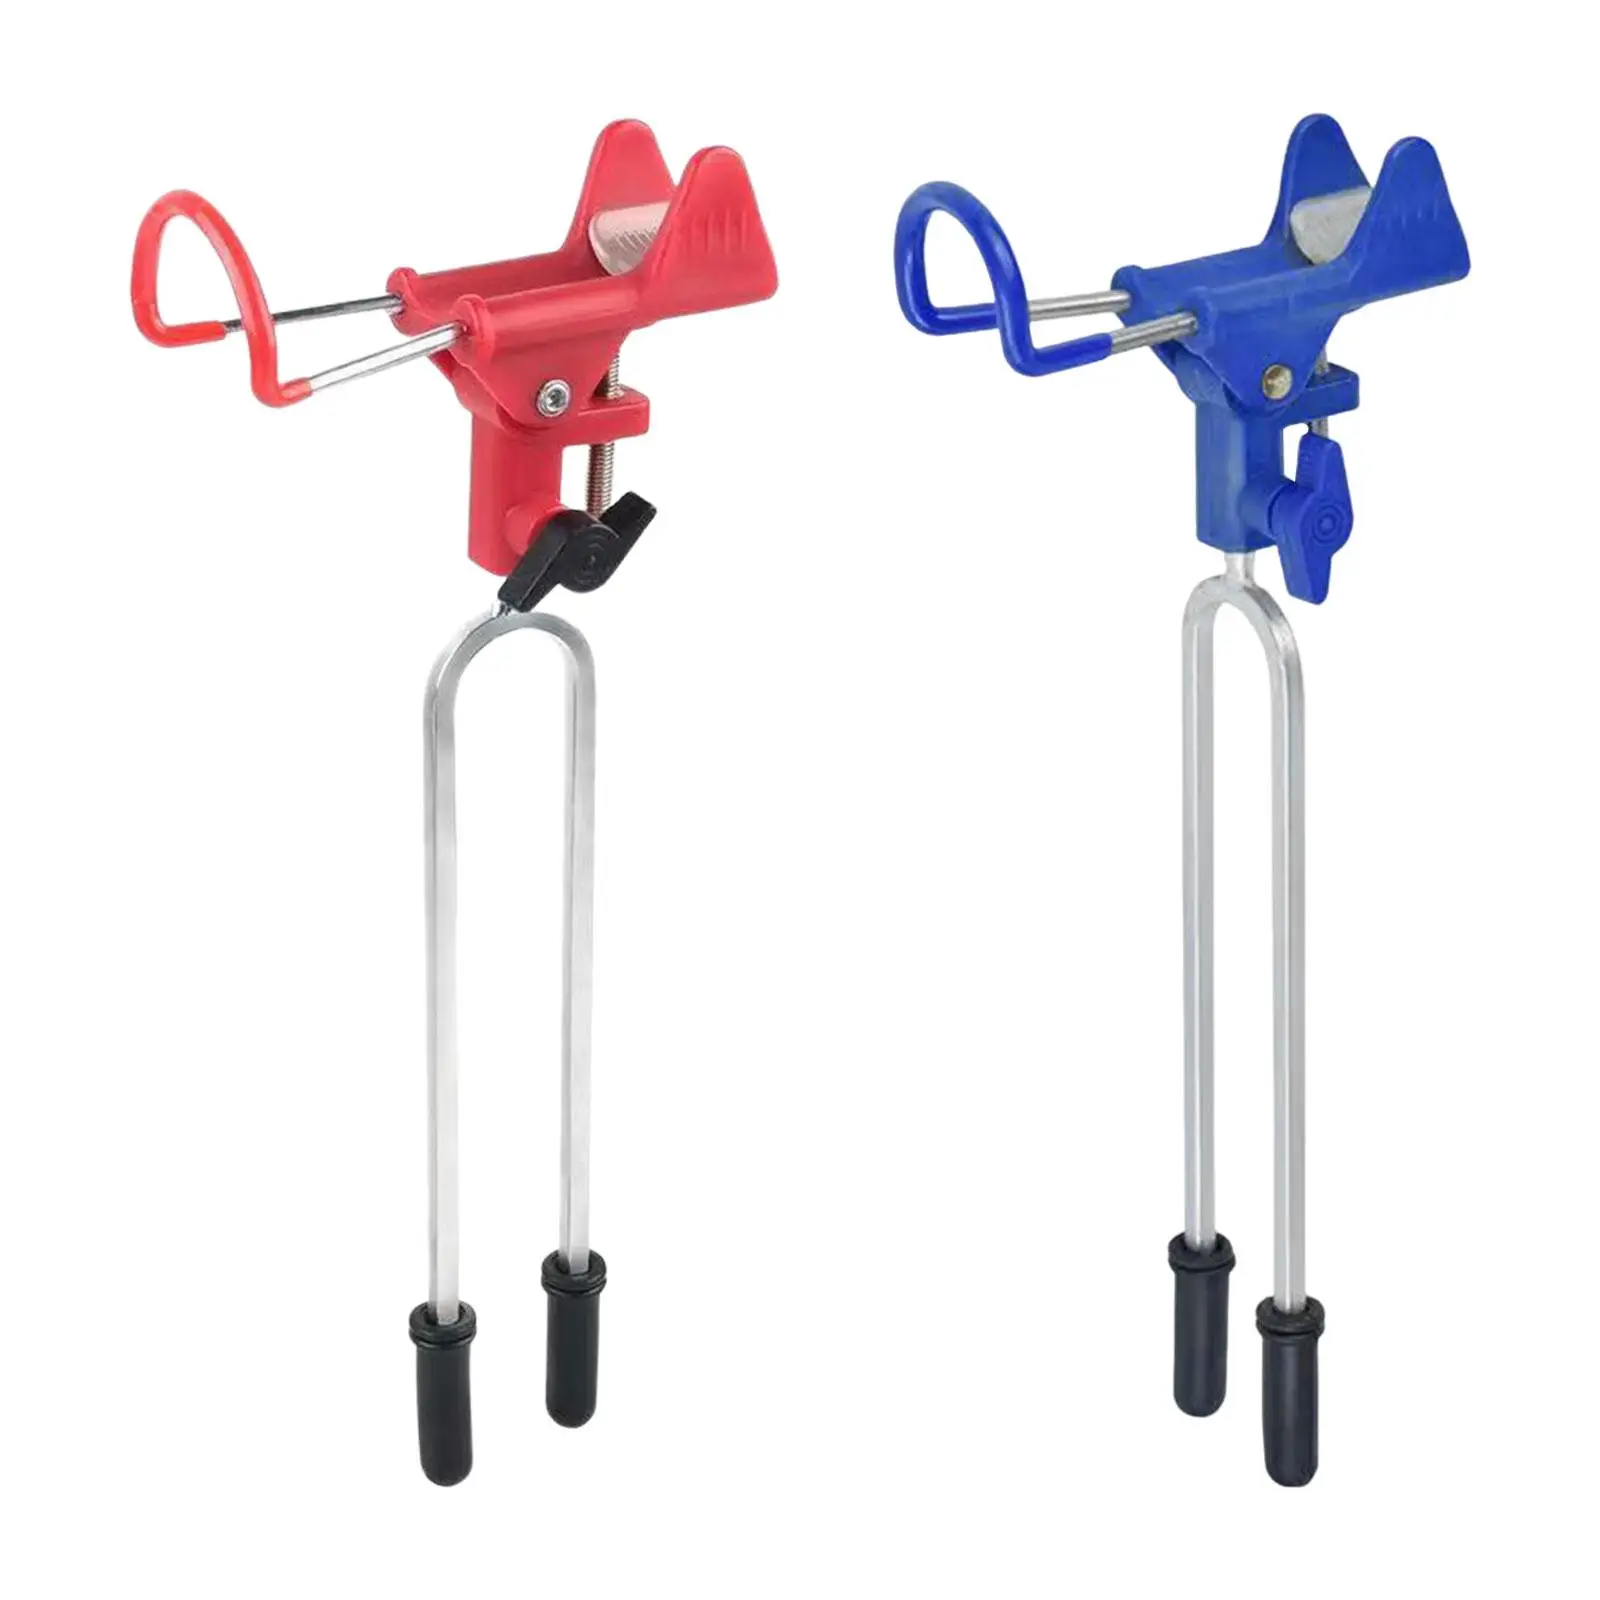 https://ae01.alicdn.com/kf/S46cc715c333e409789bef24cbf2e278bA/Metal-Fishing-Rod-Holder-Tool-Portable-Fishing-Pole-Support-Rack-Adjustable-Angle-Rod-Stand-for-Beach.jpg